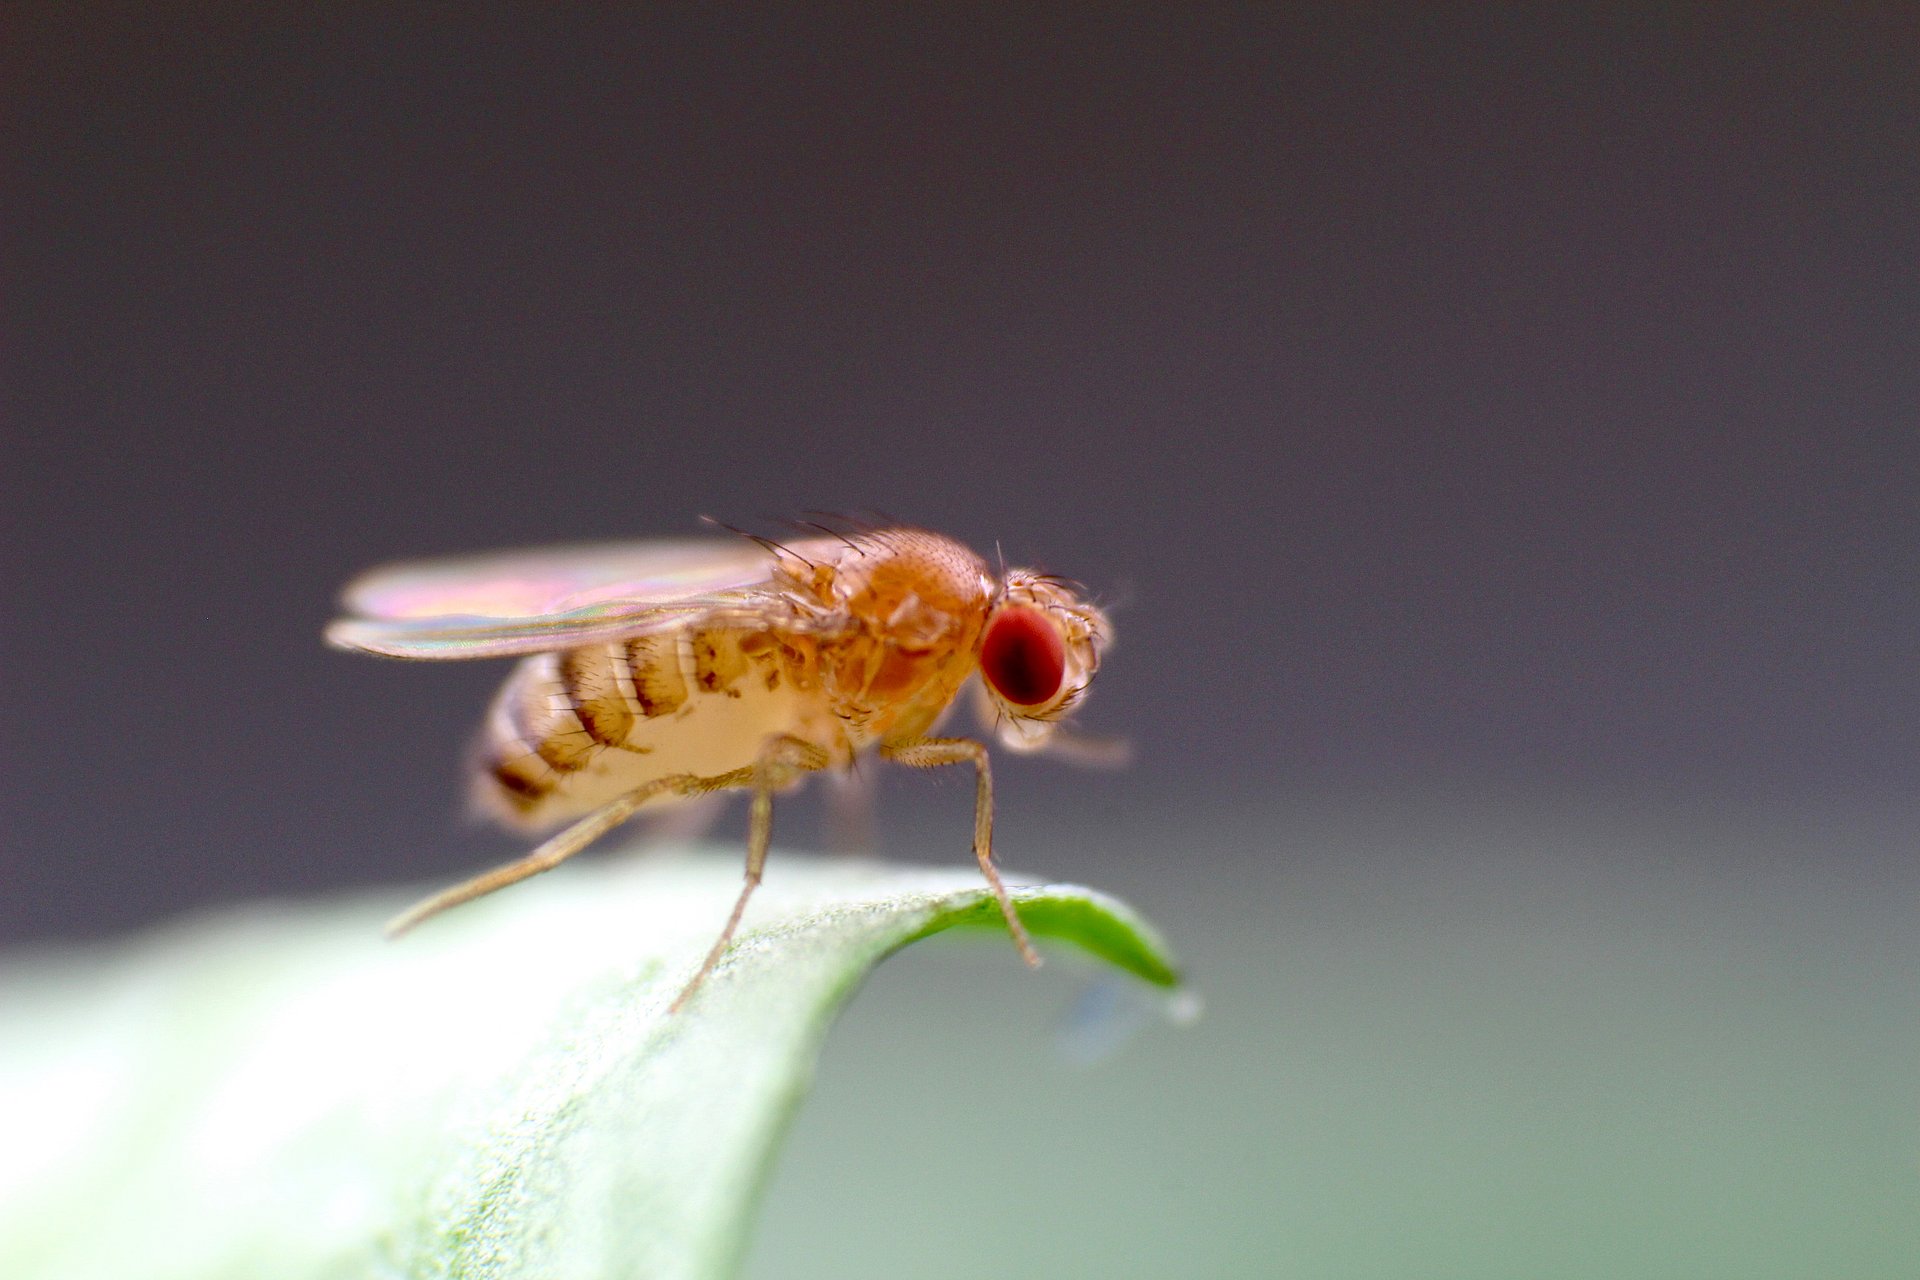 The "flying genome": The genetic model fly Drosophila melanogaster was investigated for the current study by Prof. Grunwald Kadows' research group on how the odour of animals ages. (Photo: Ariane Böhm / TUM)